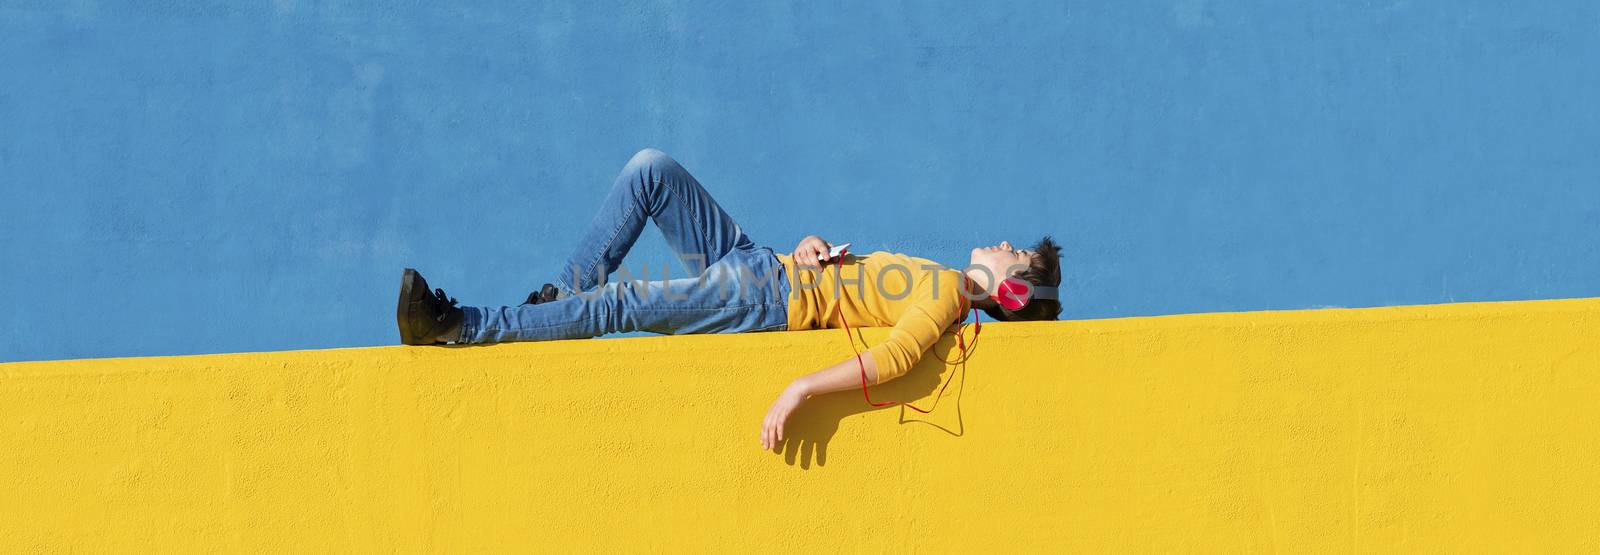 Front view of a young boy wearing casual clothes lying on a yellow fence against a blue wall while using a mobile phone to listening music by headphones by raferto1973